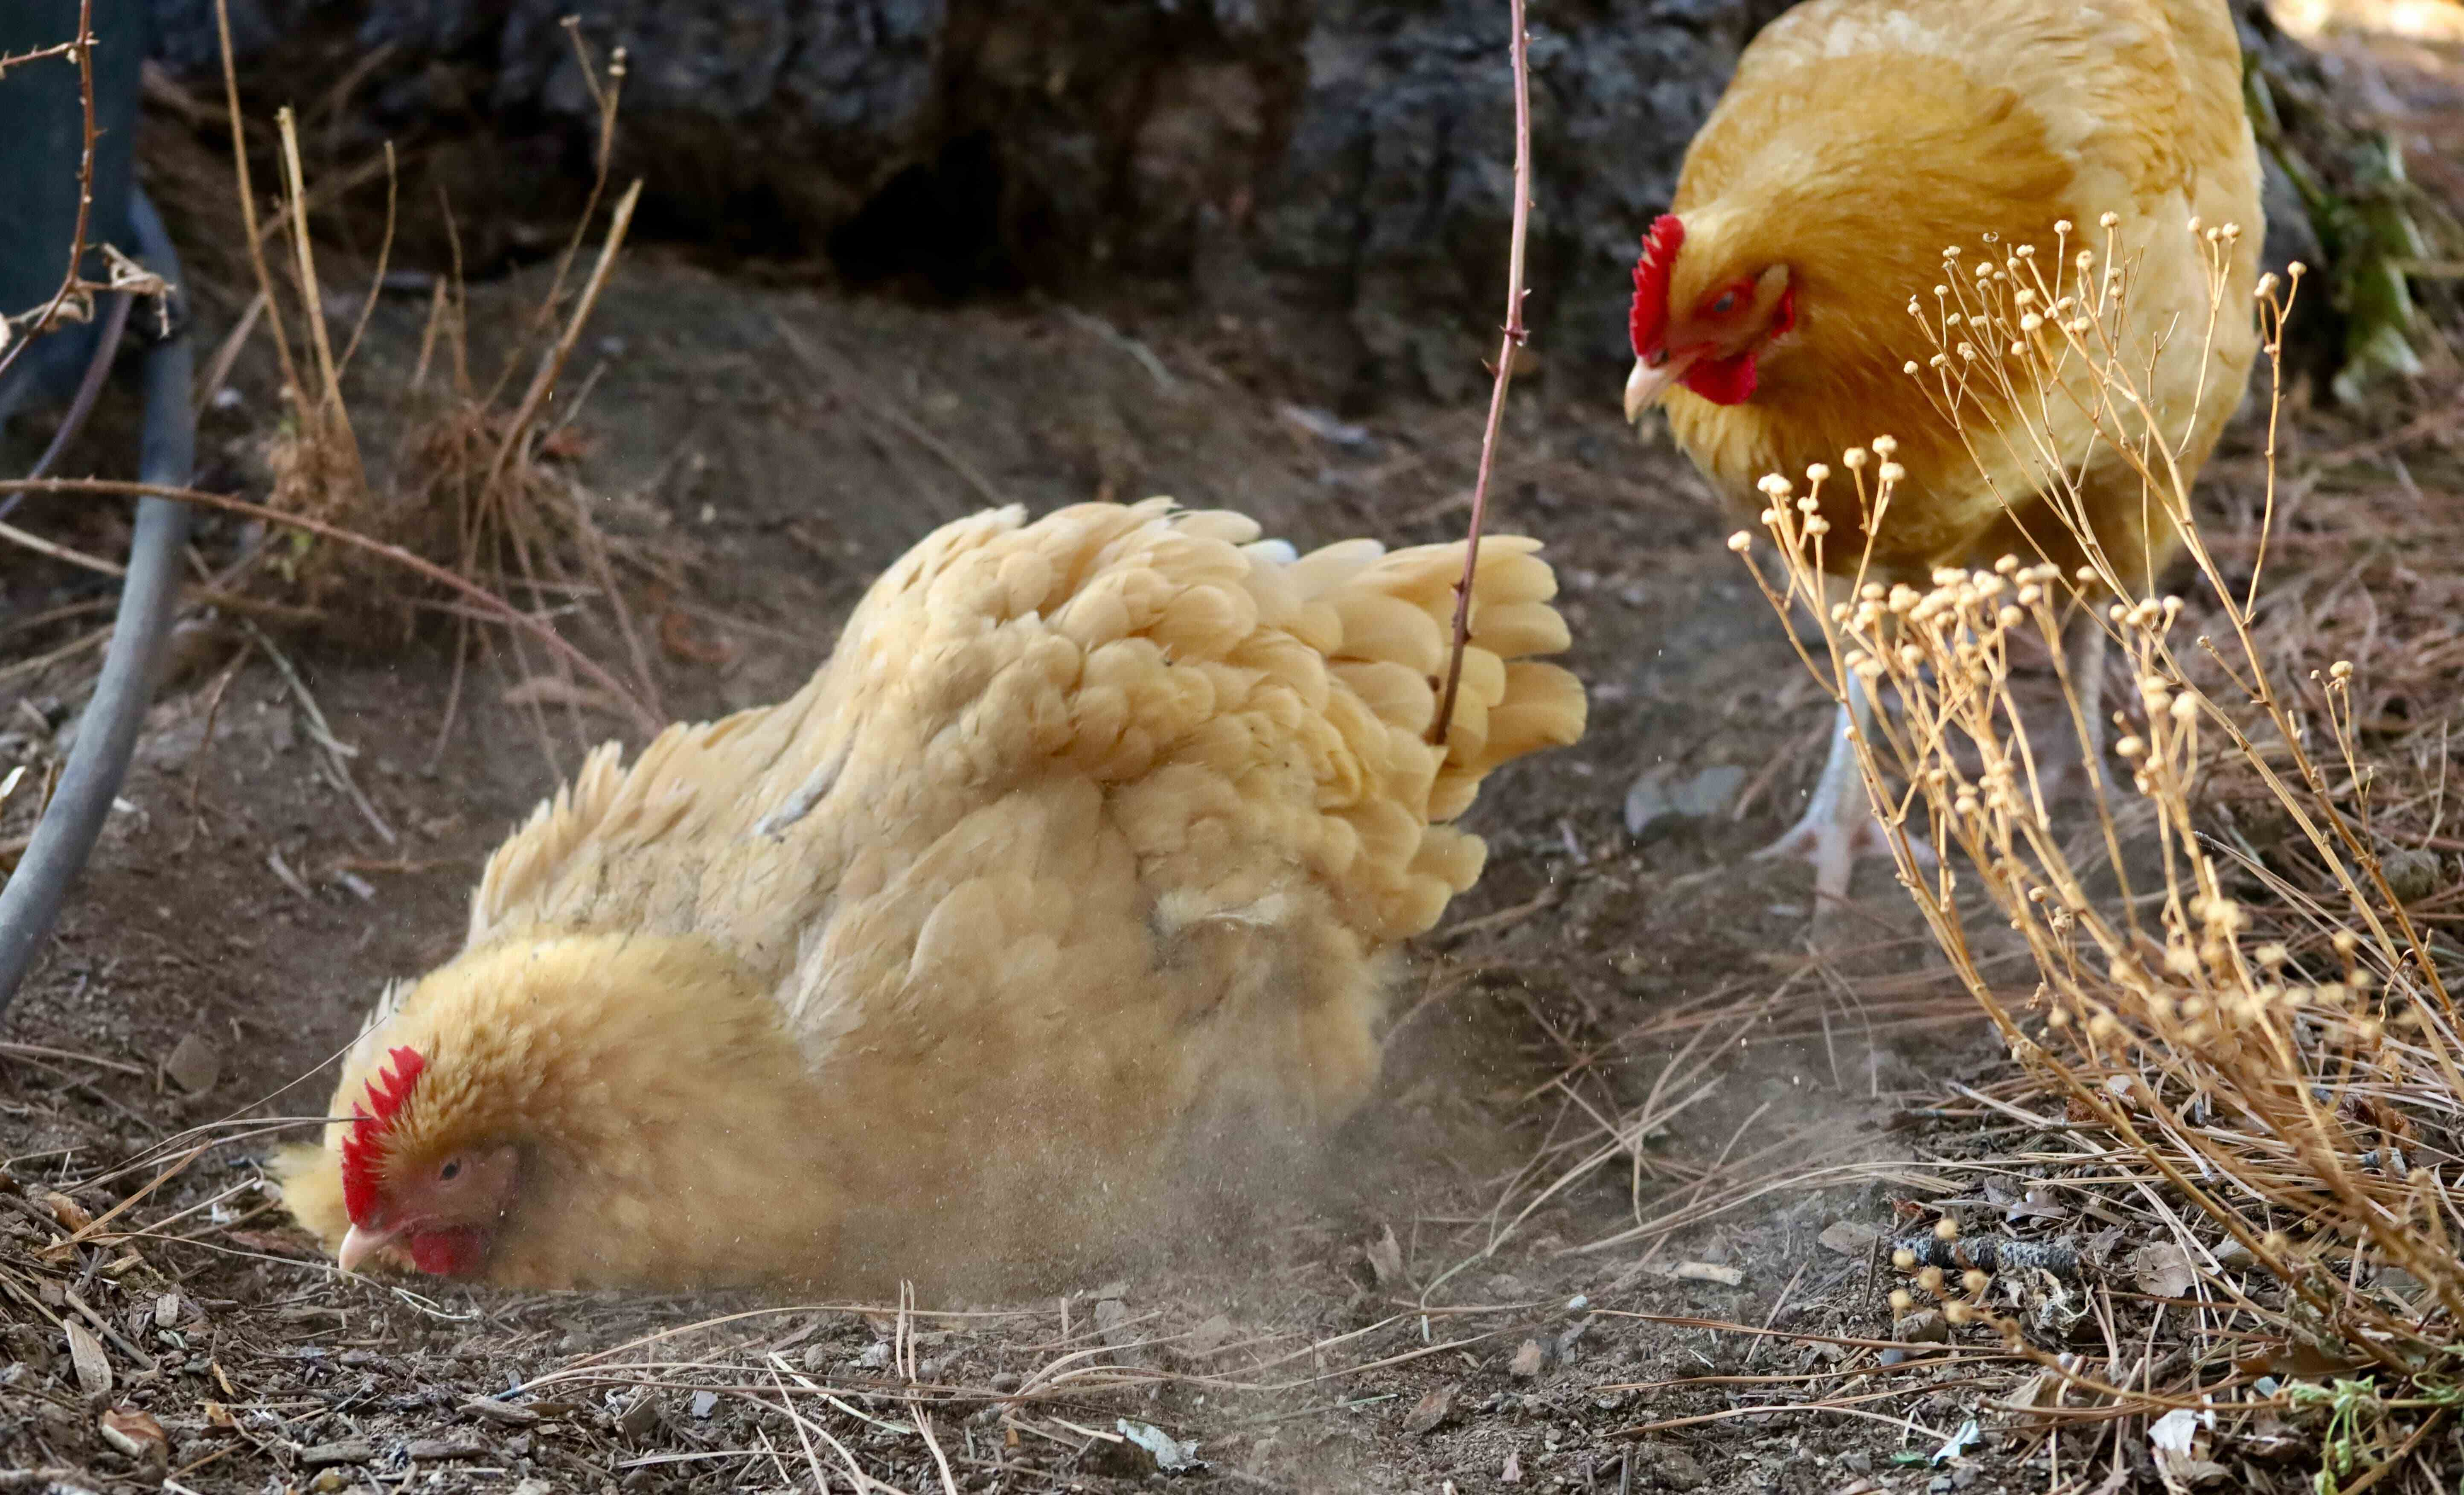 Two chickens having a dust bath.